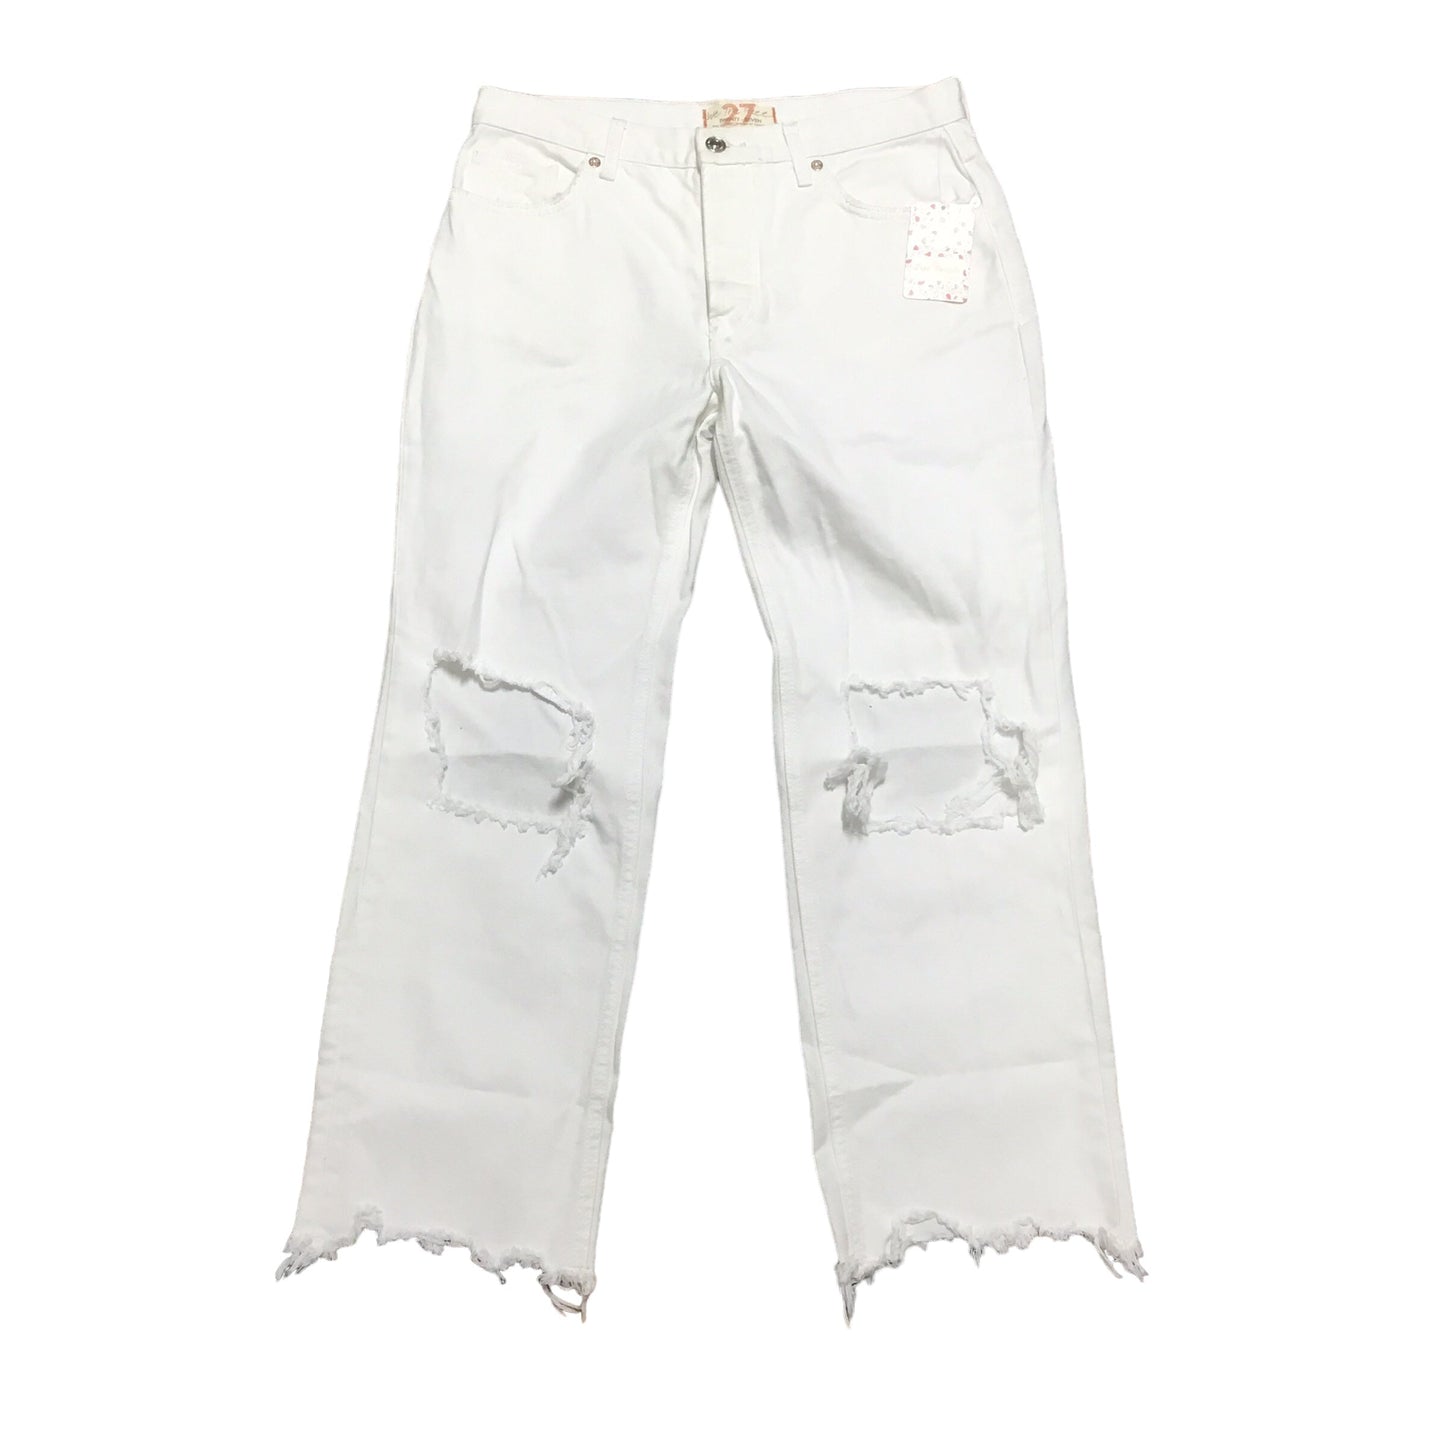 White Jeans Cropped Free People, Size 4